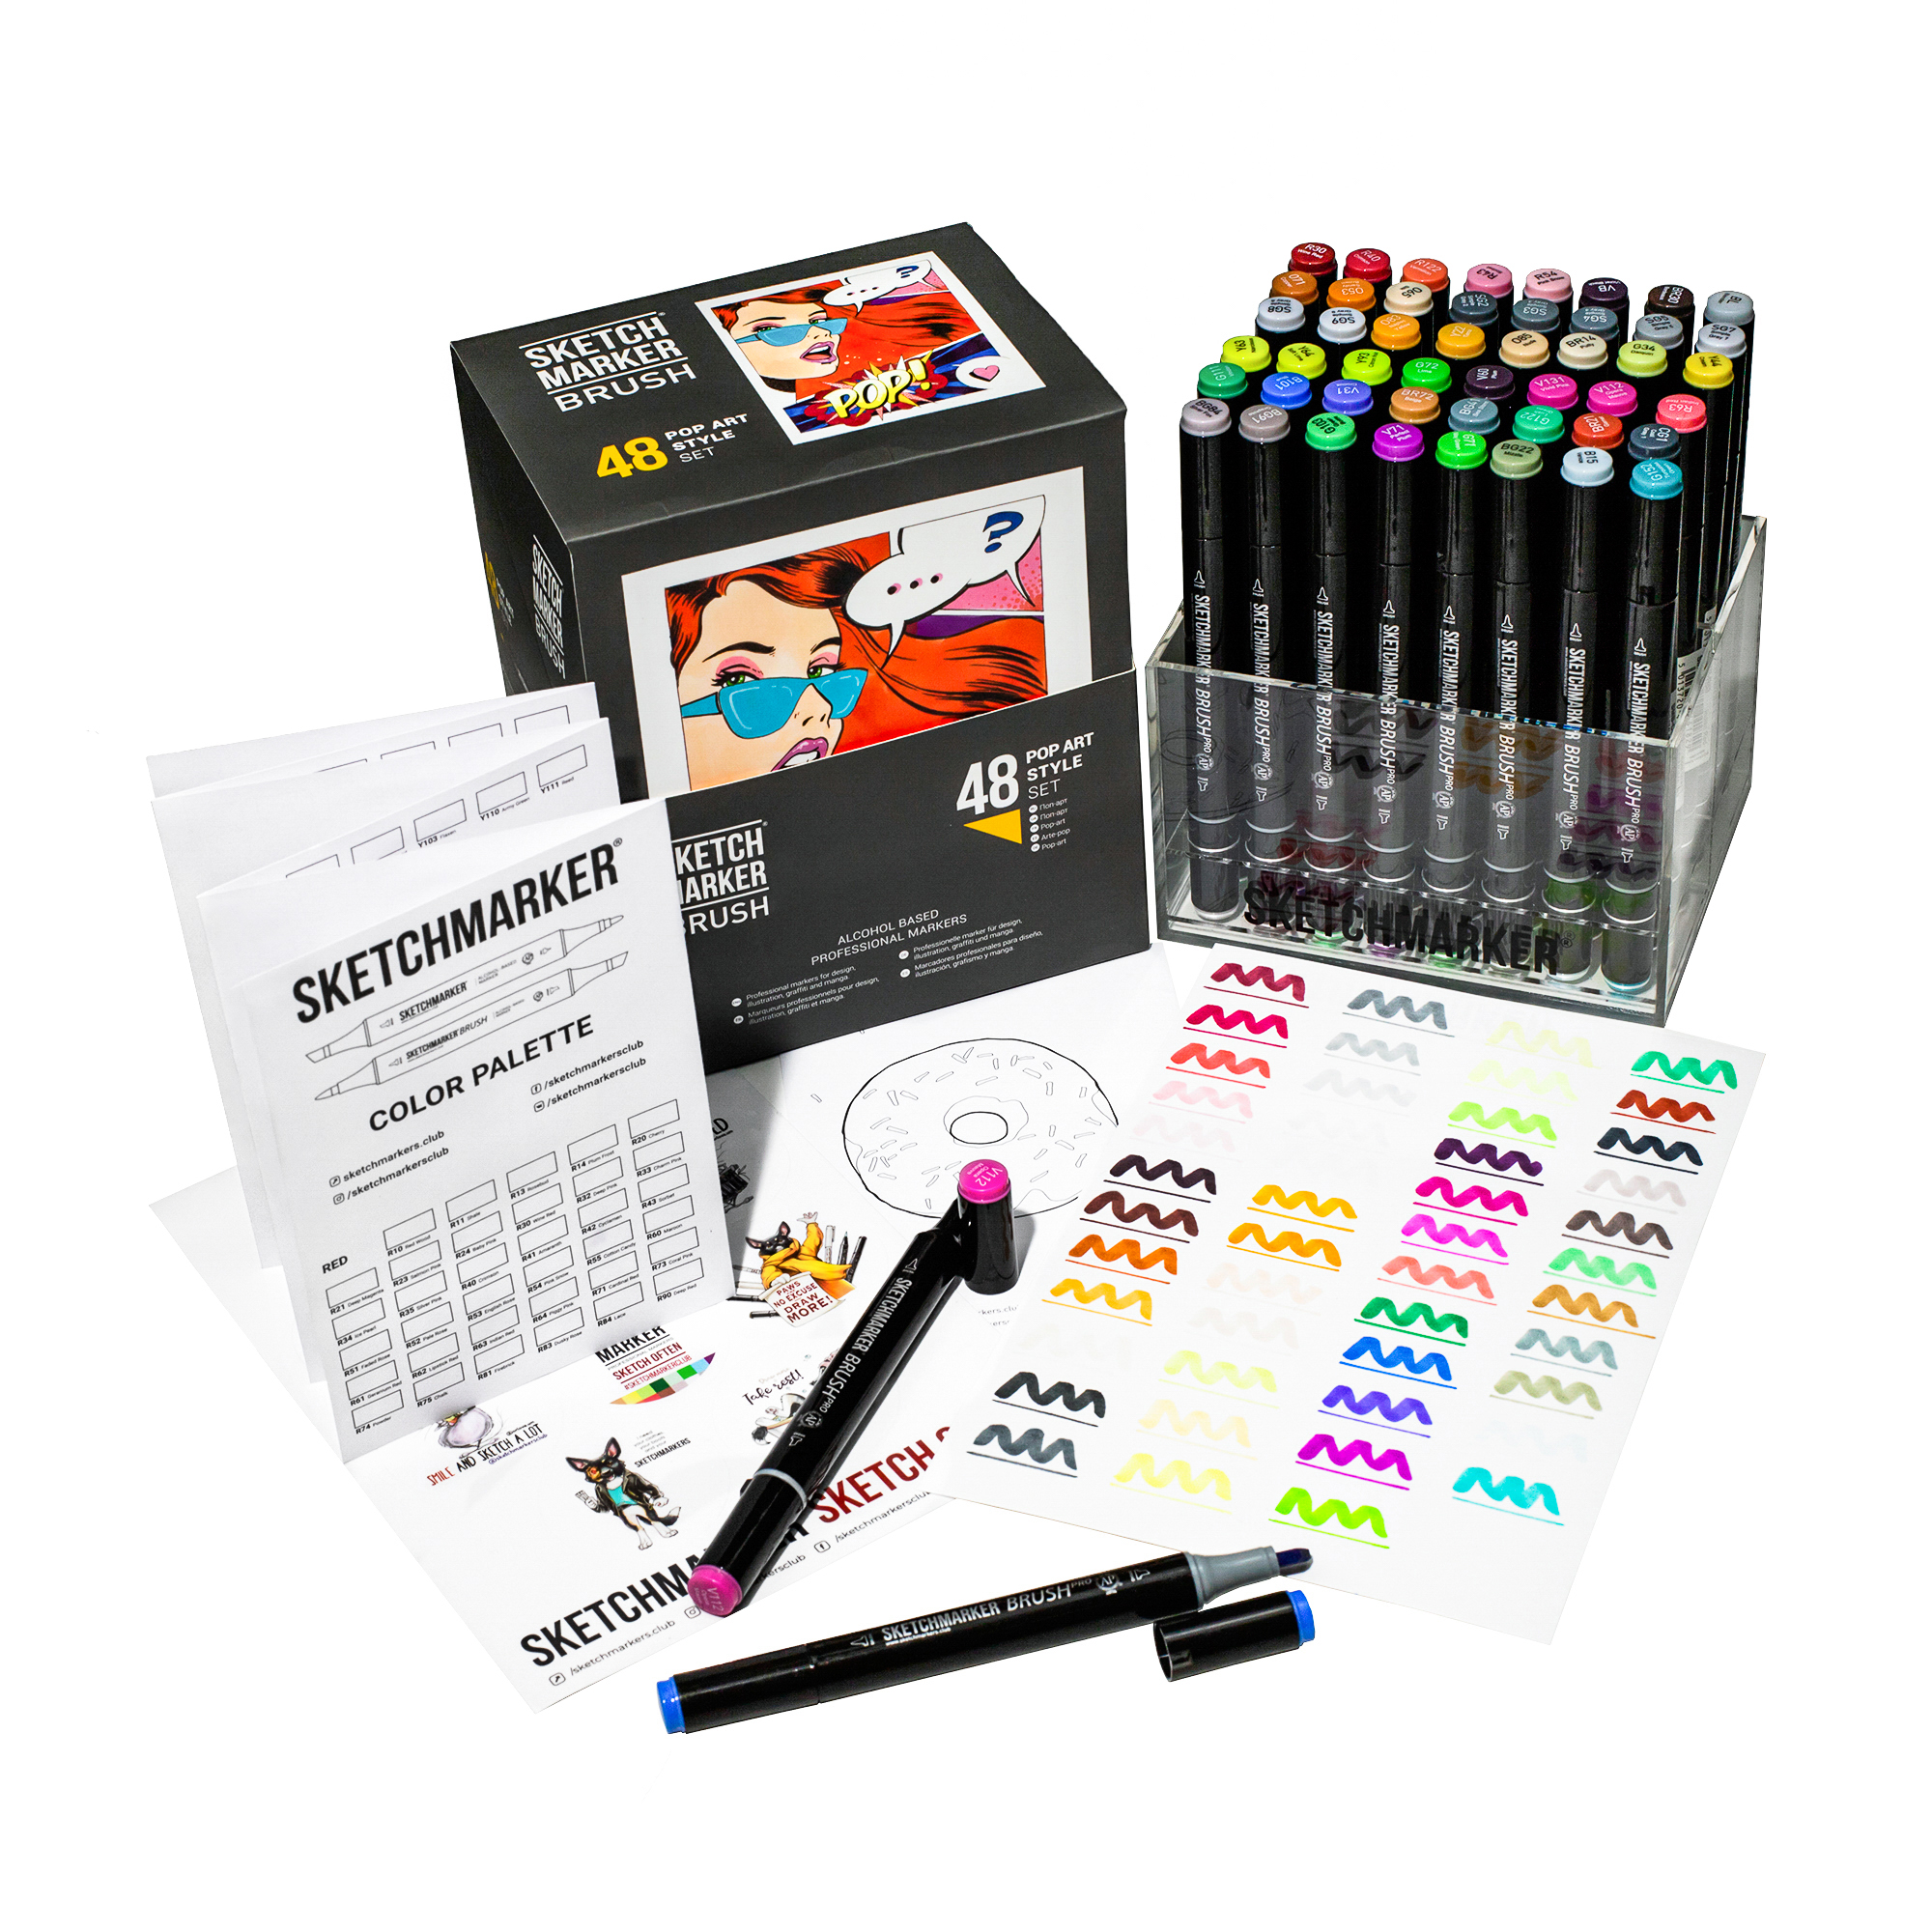 SKETCHMARKER BRUSH PRO POP ART STYLE (48 markers in the – sketchmarkers.club